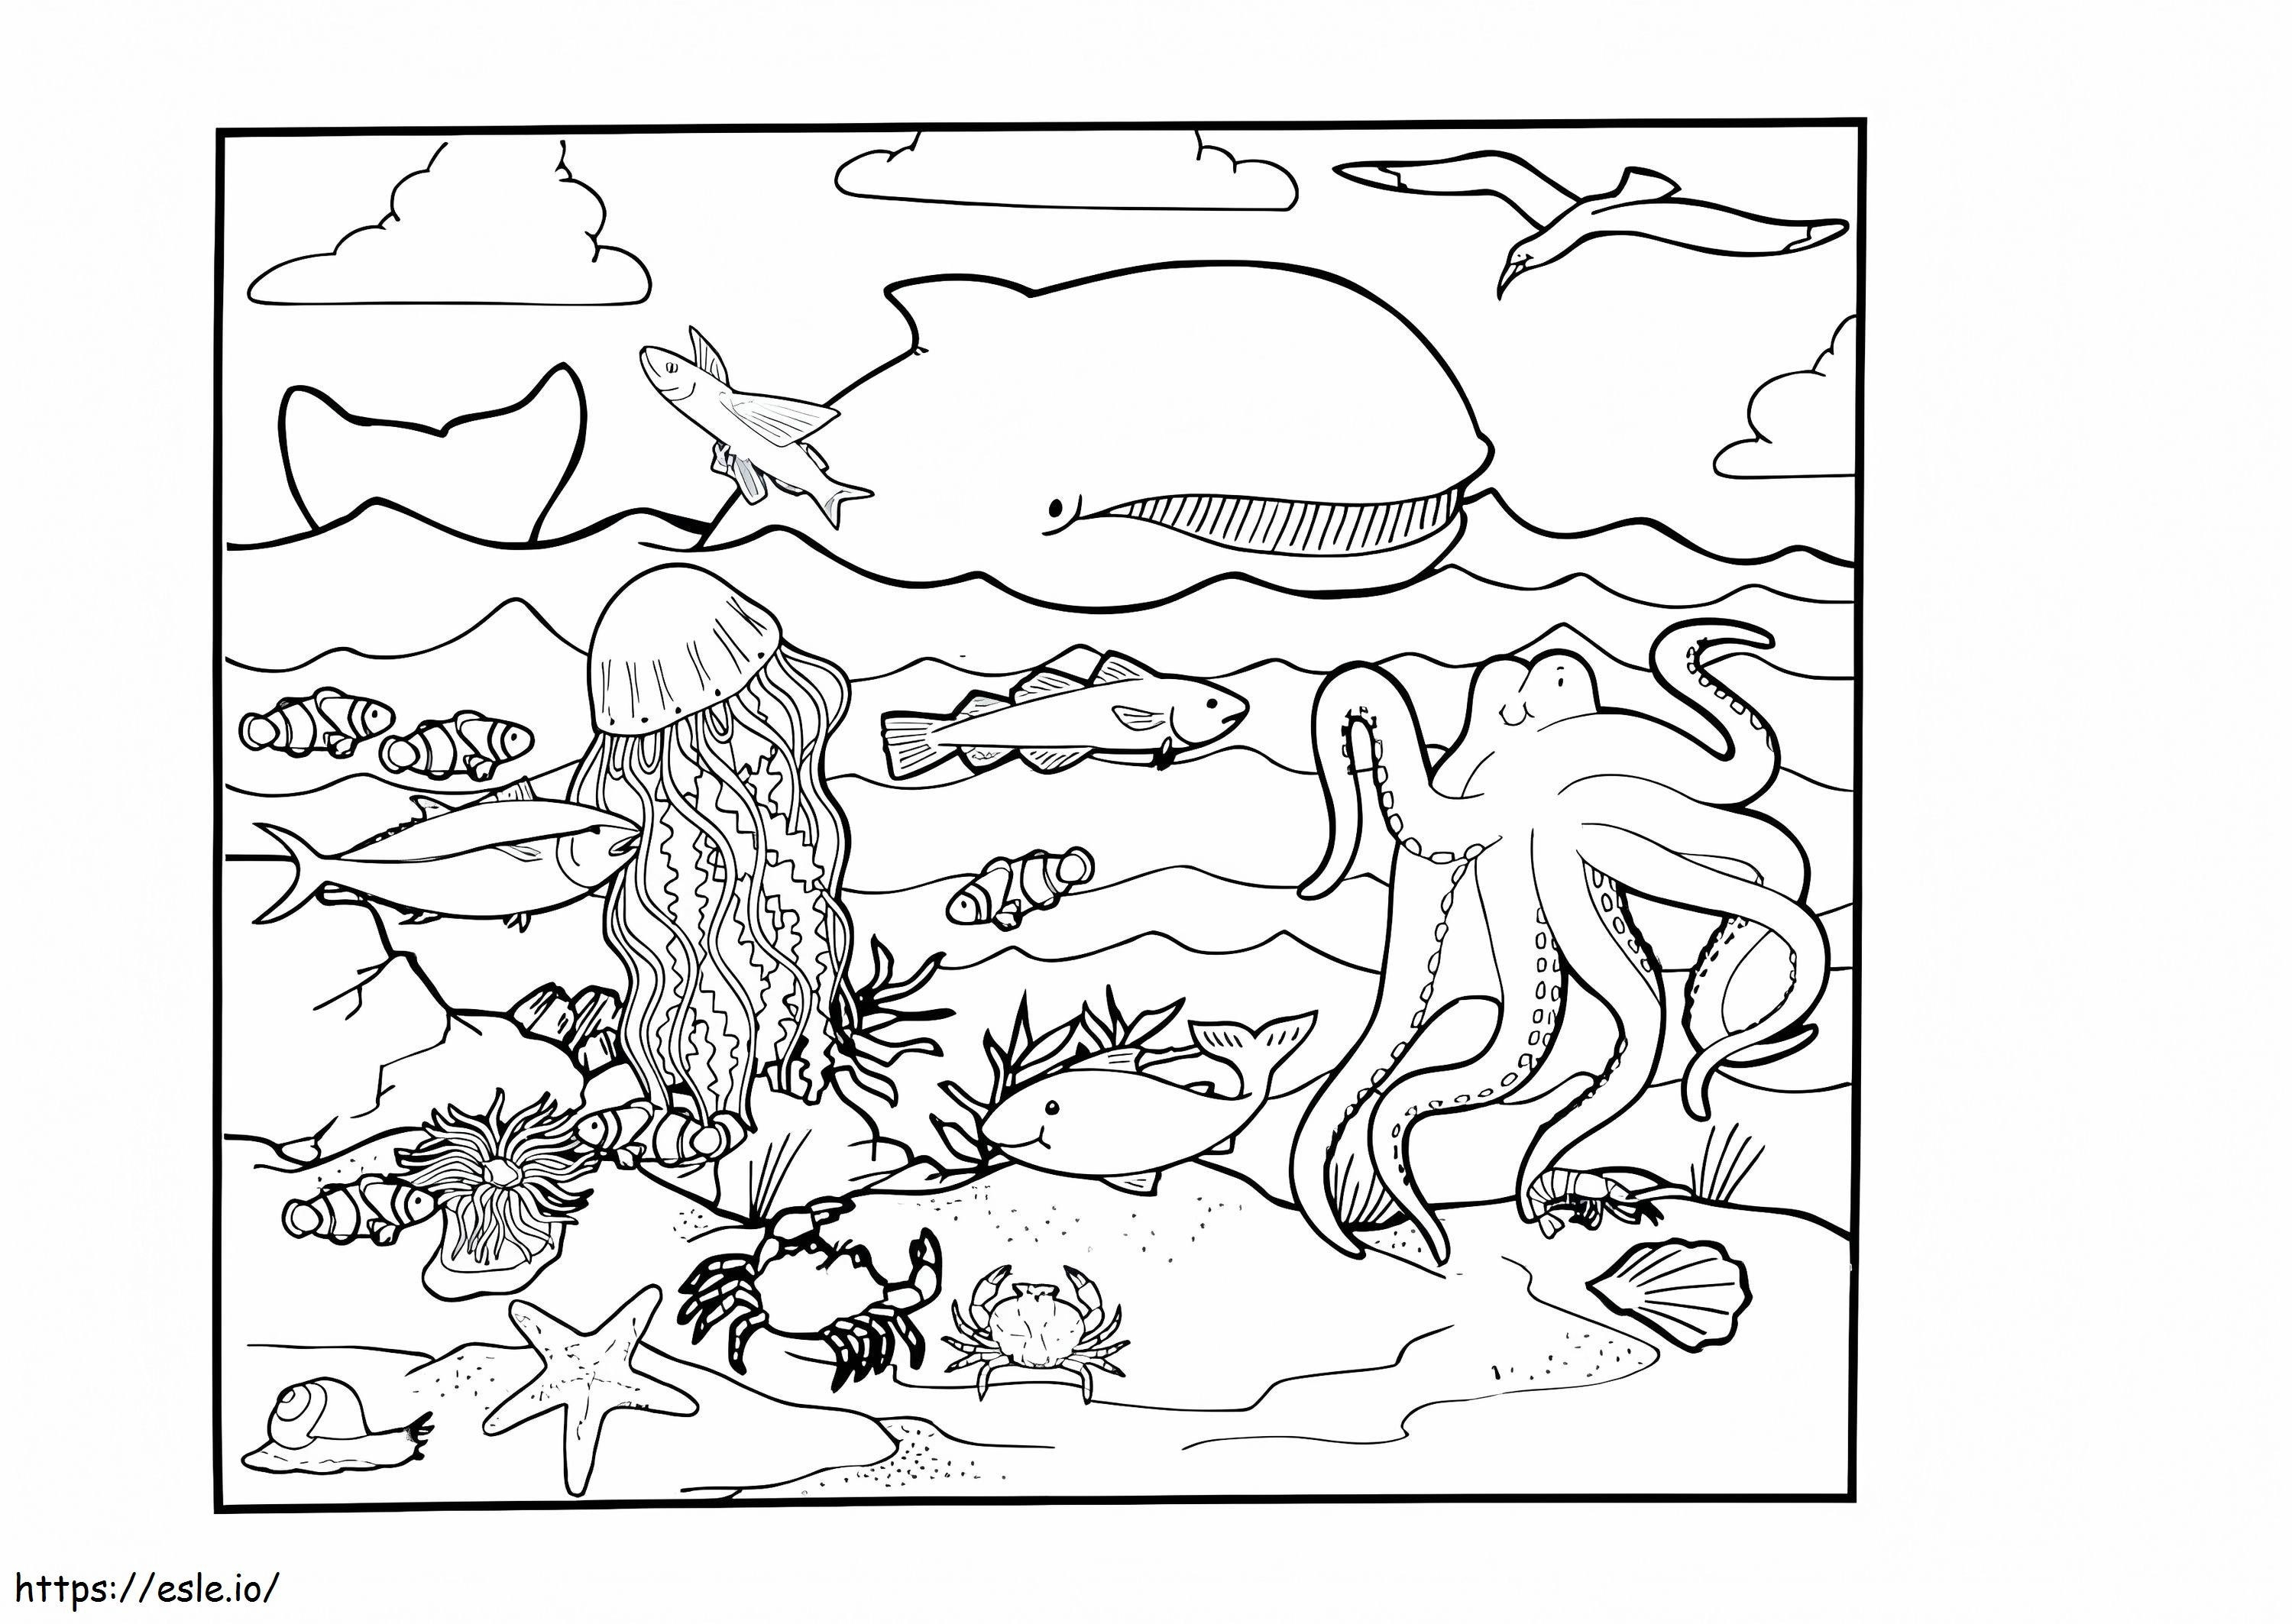 The Ocean coloring page